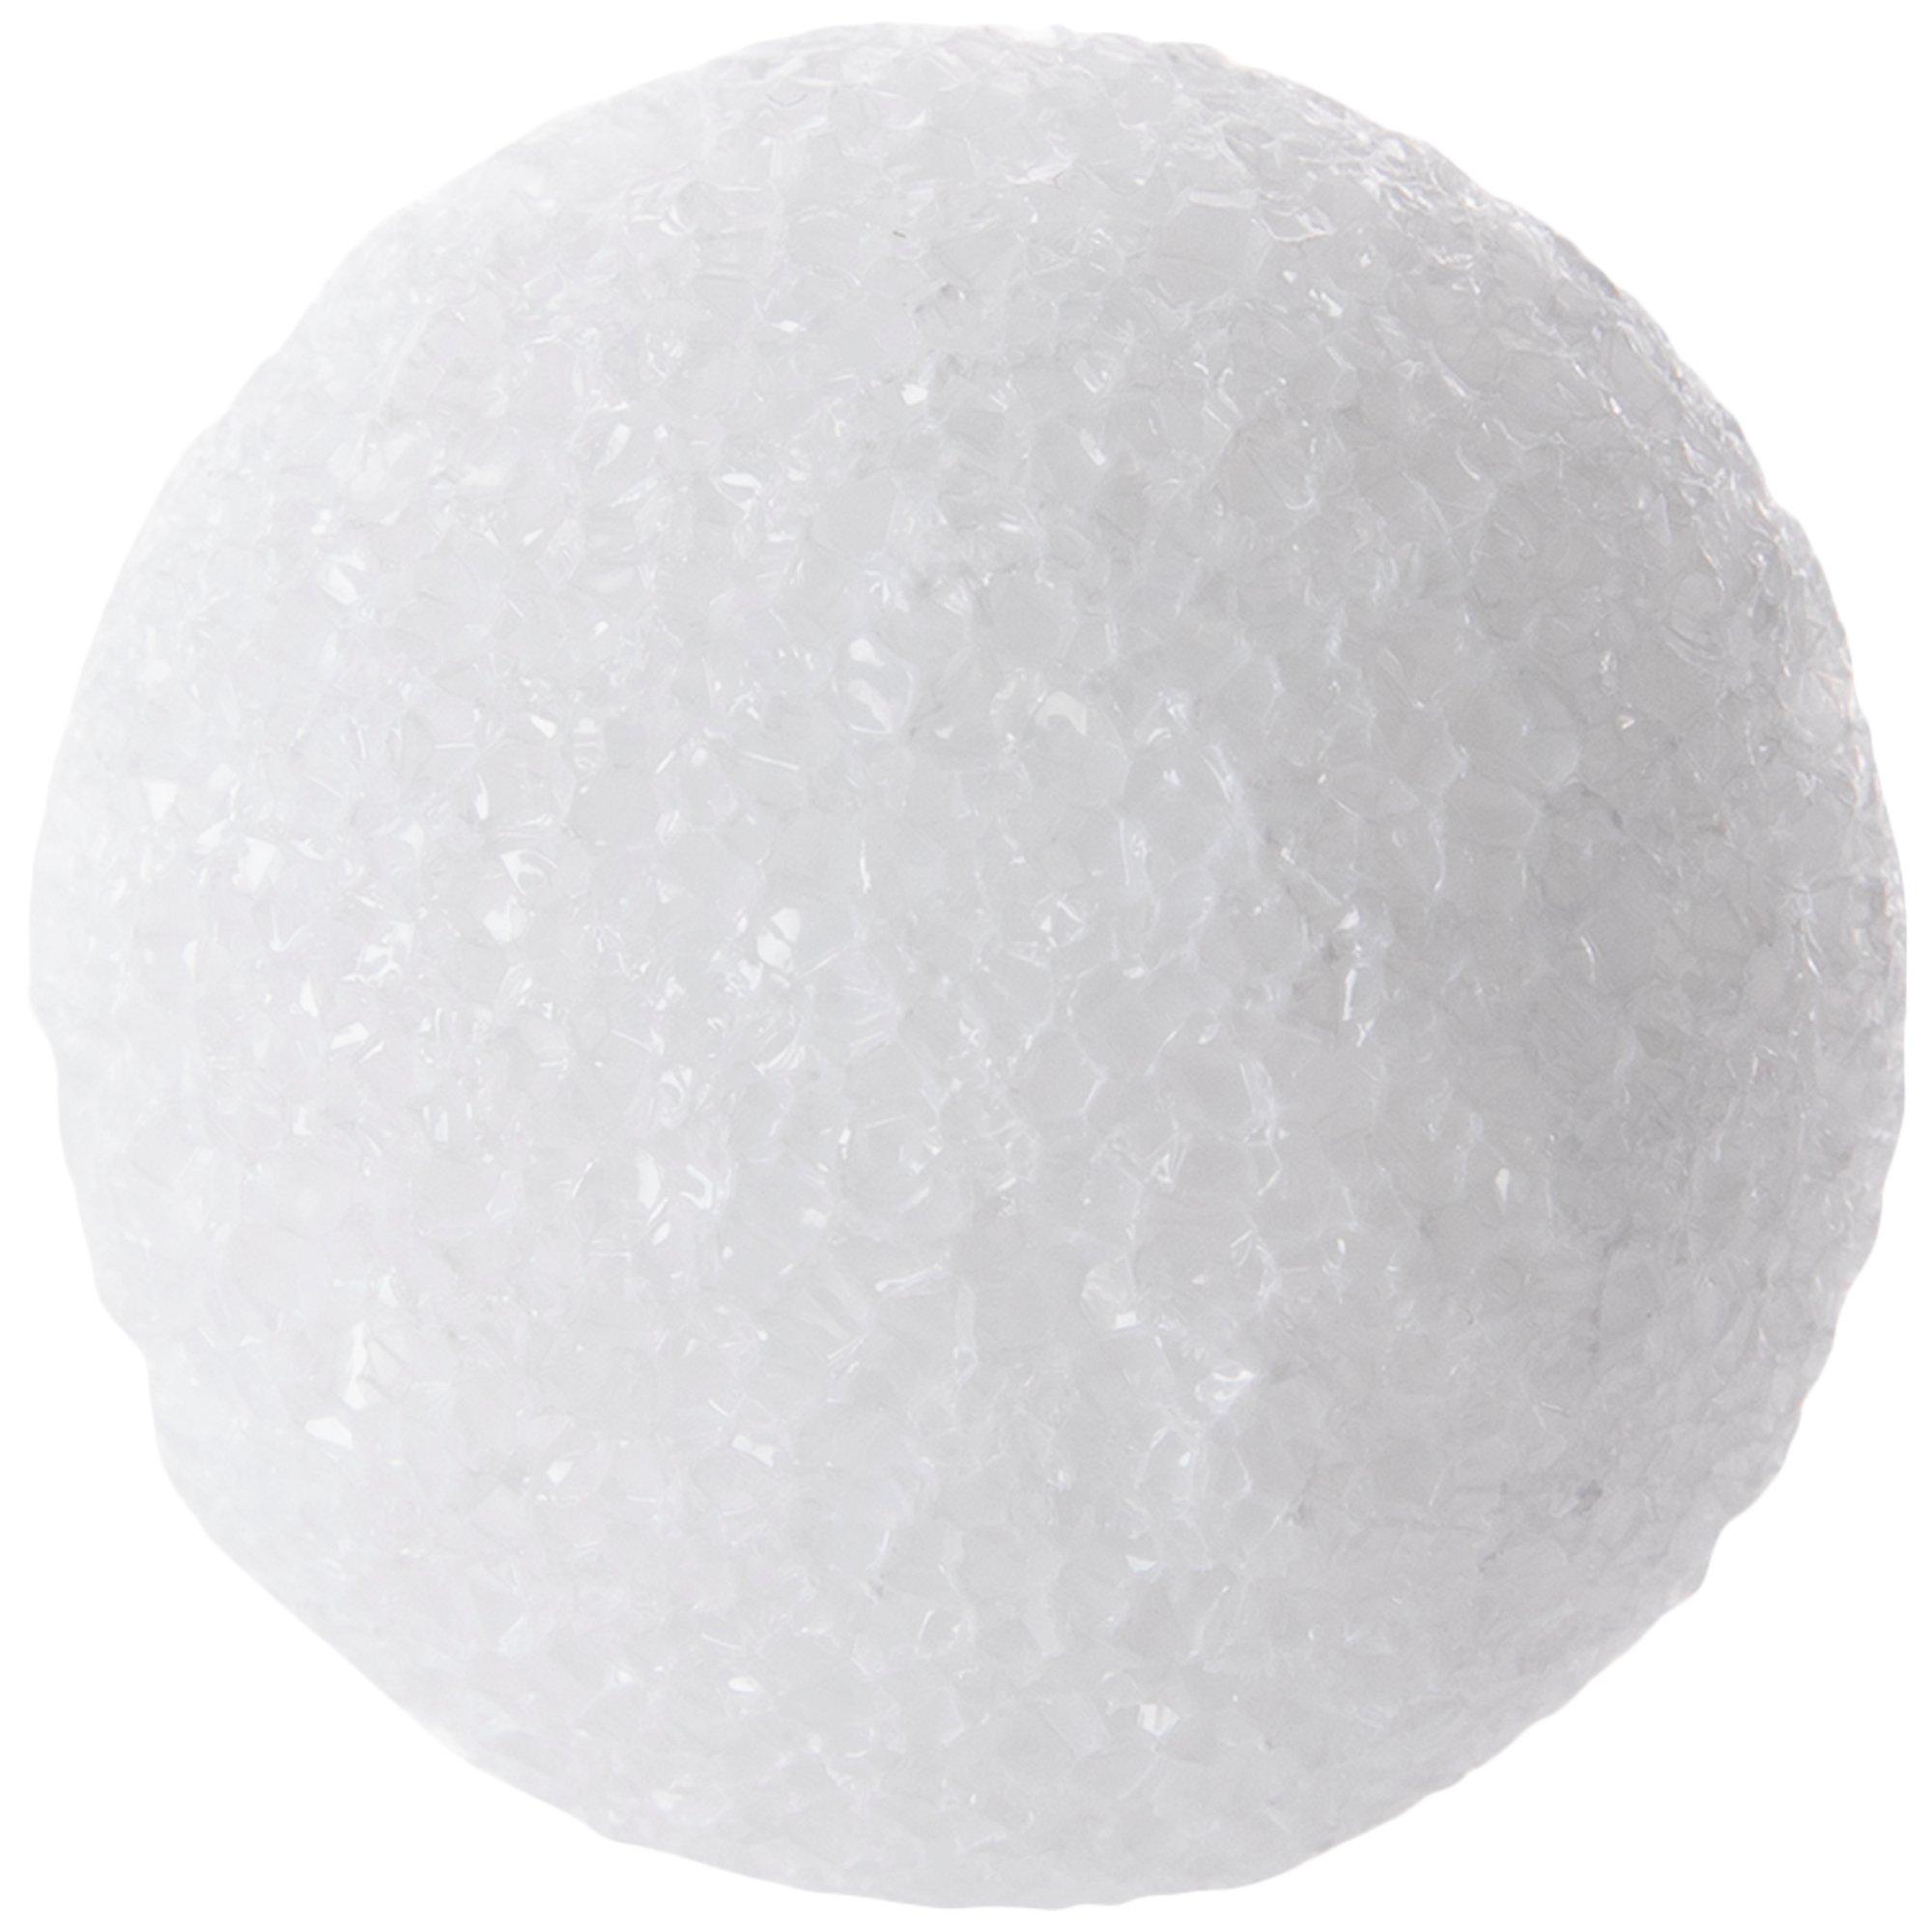  36Pack Craft Foam Balls Assorted Sizes(1-2.4in), Foam Balls for  Arts and Crafts,Christmas, School Craft Project and Holiday Party。 : Arts,  Crafts & Sewing